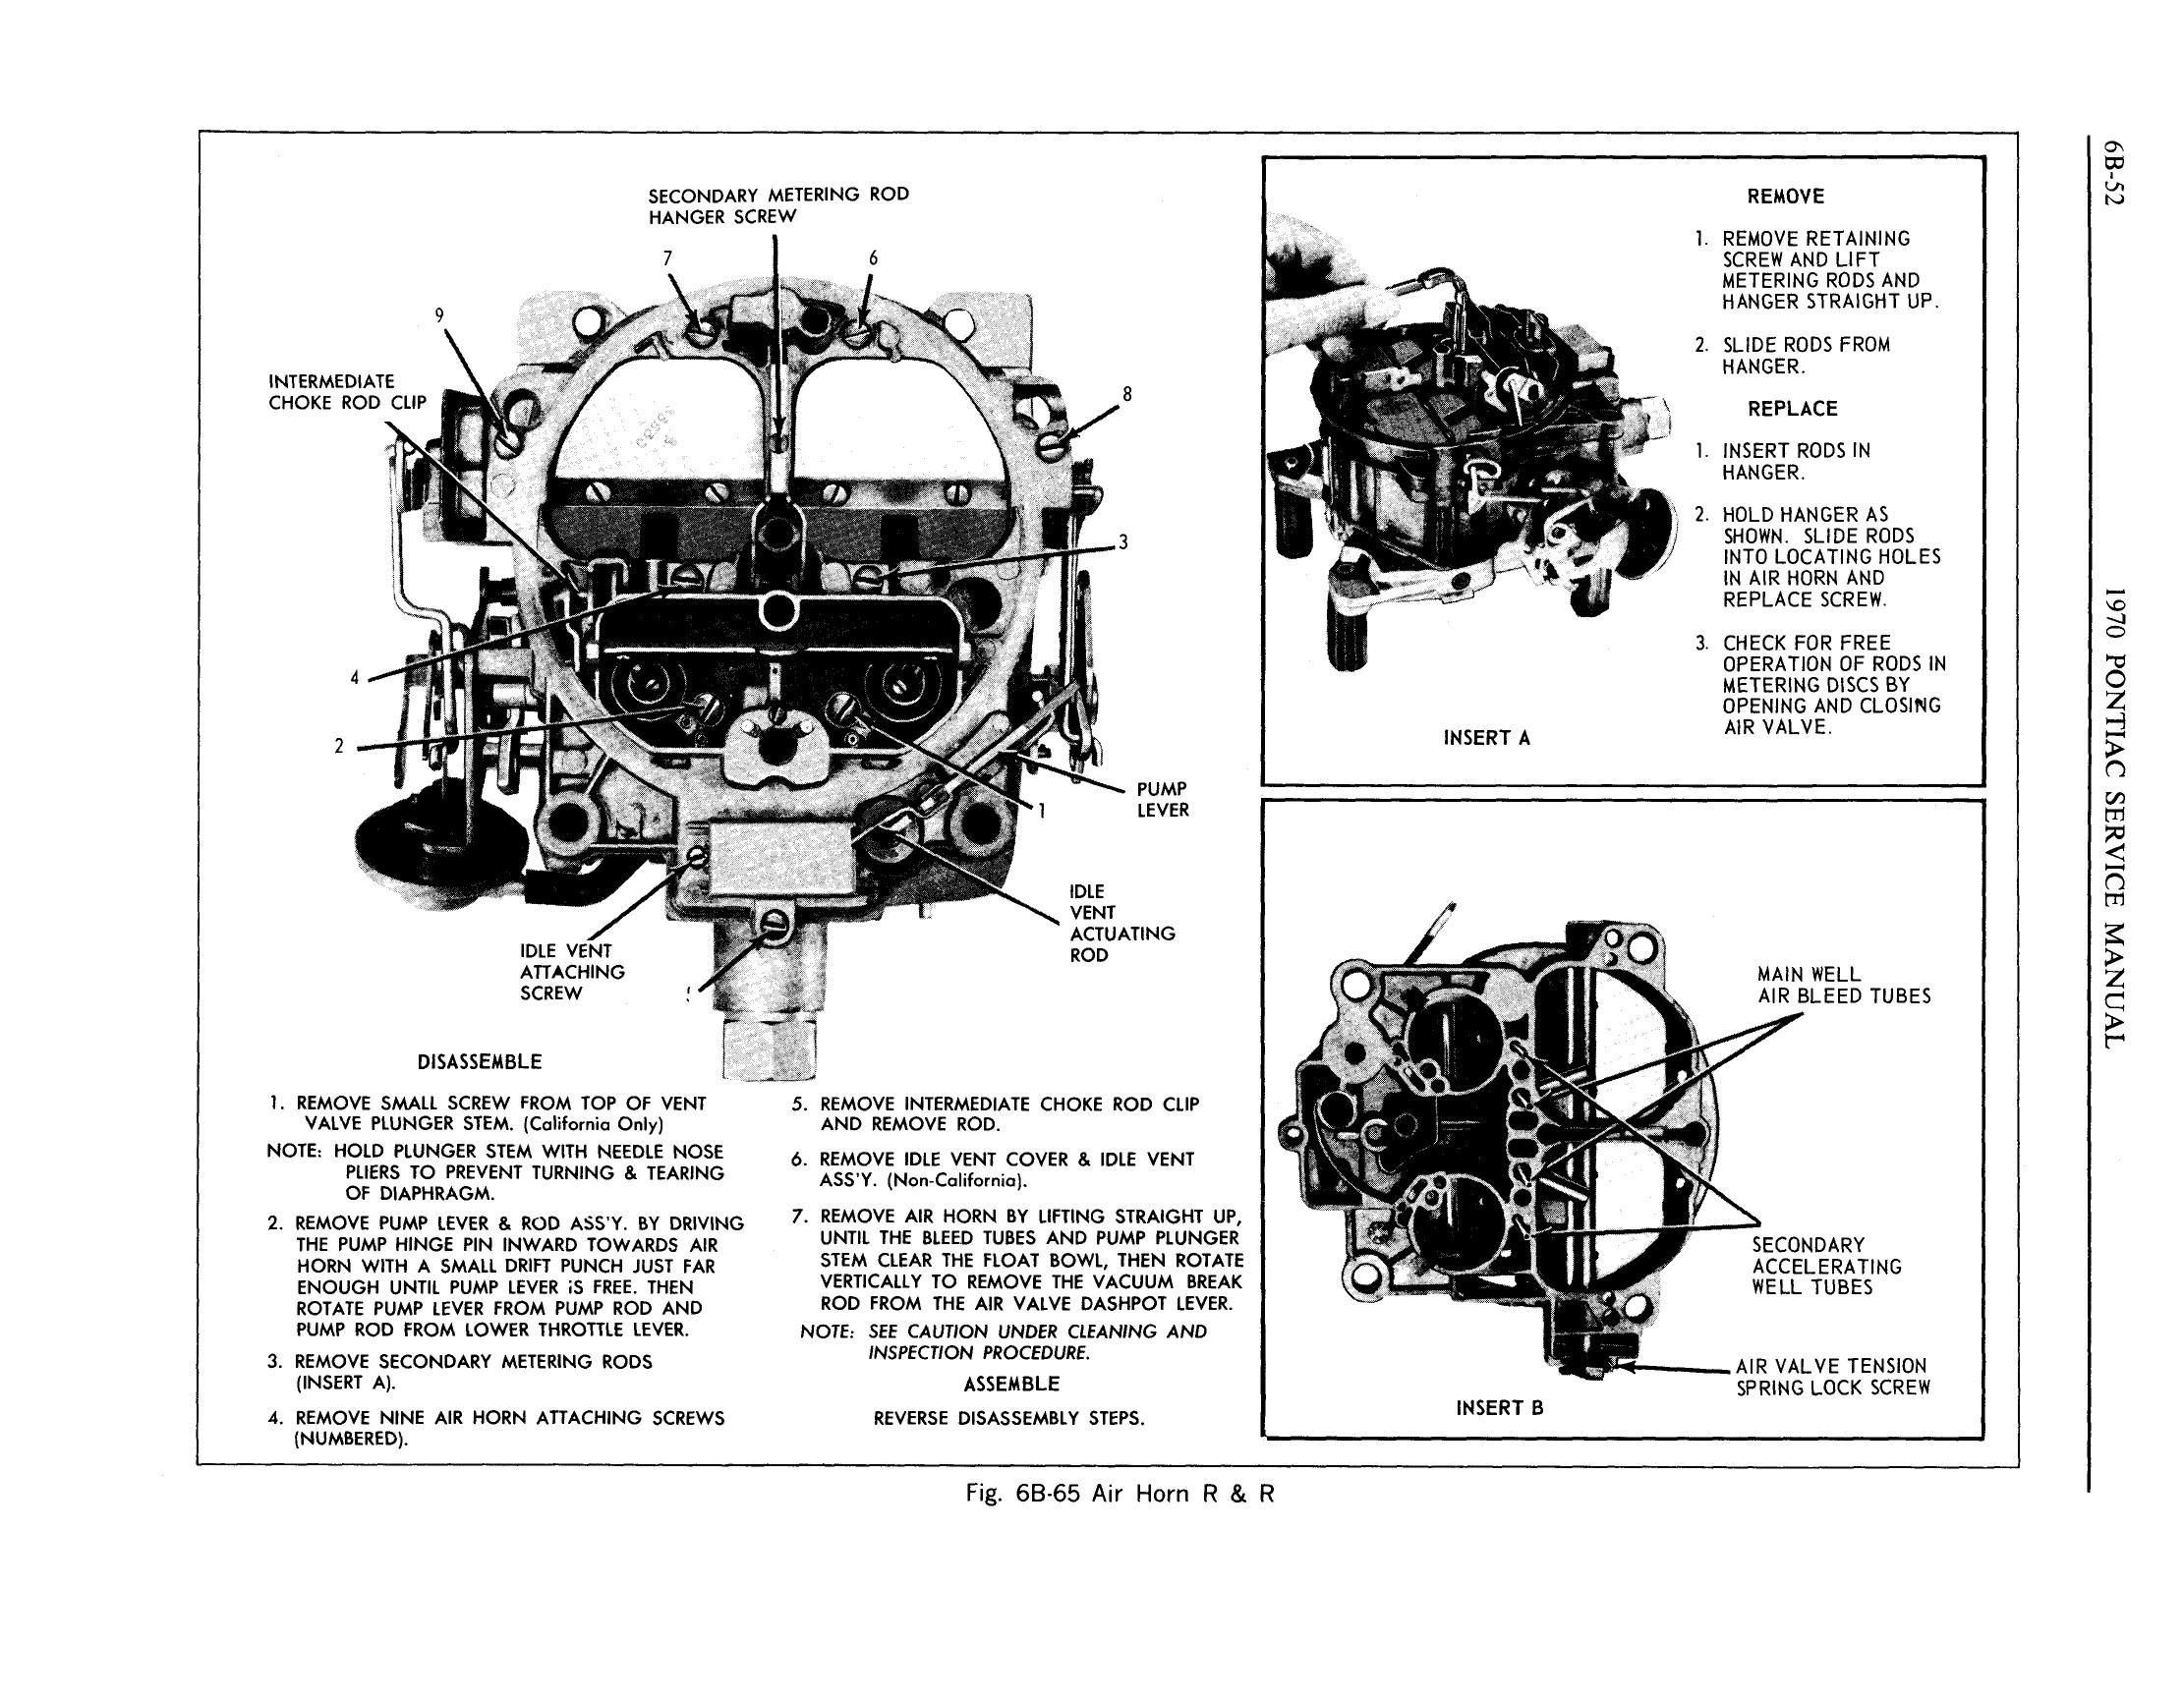 1970 Pontiac Chassis Service Manual - Engine Fuel Page 52 of 65